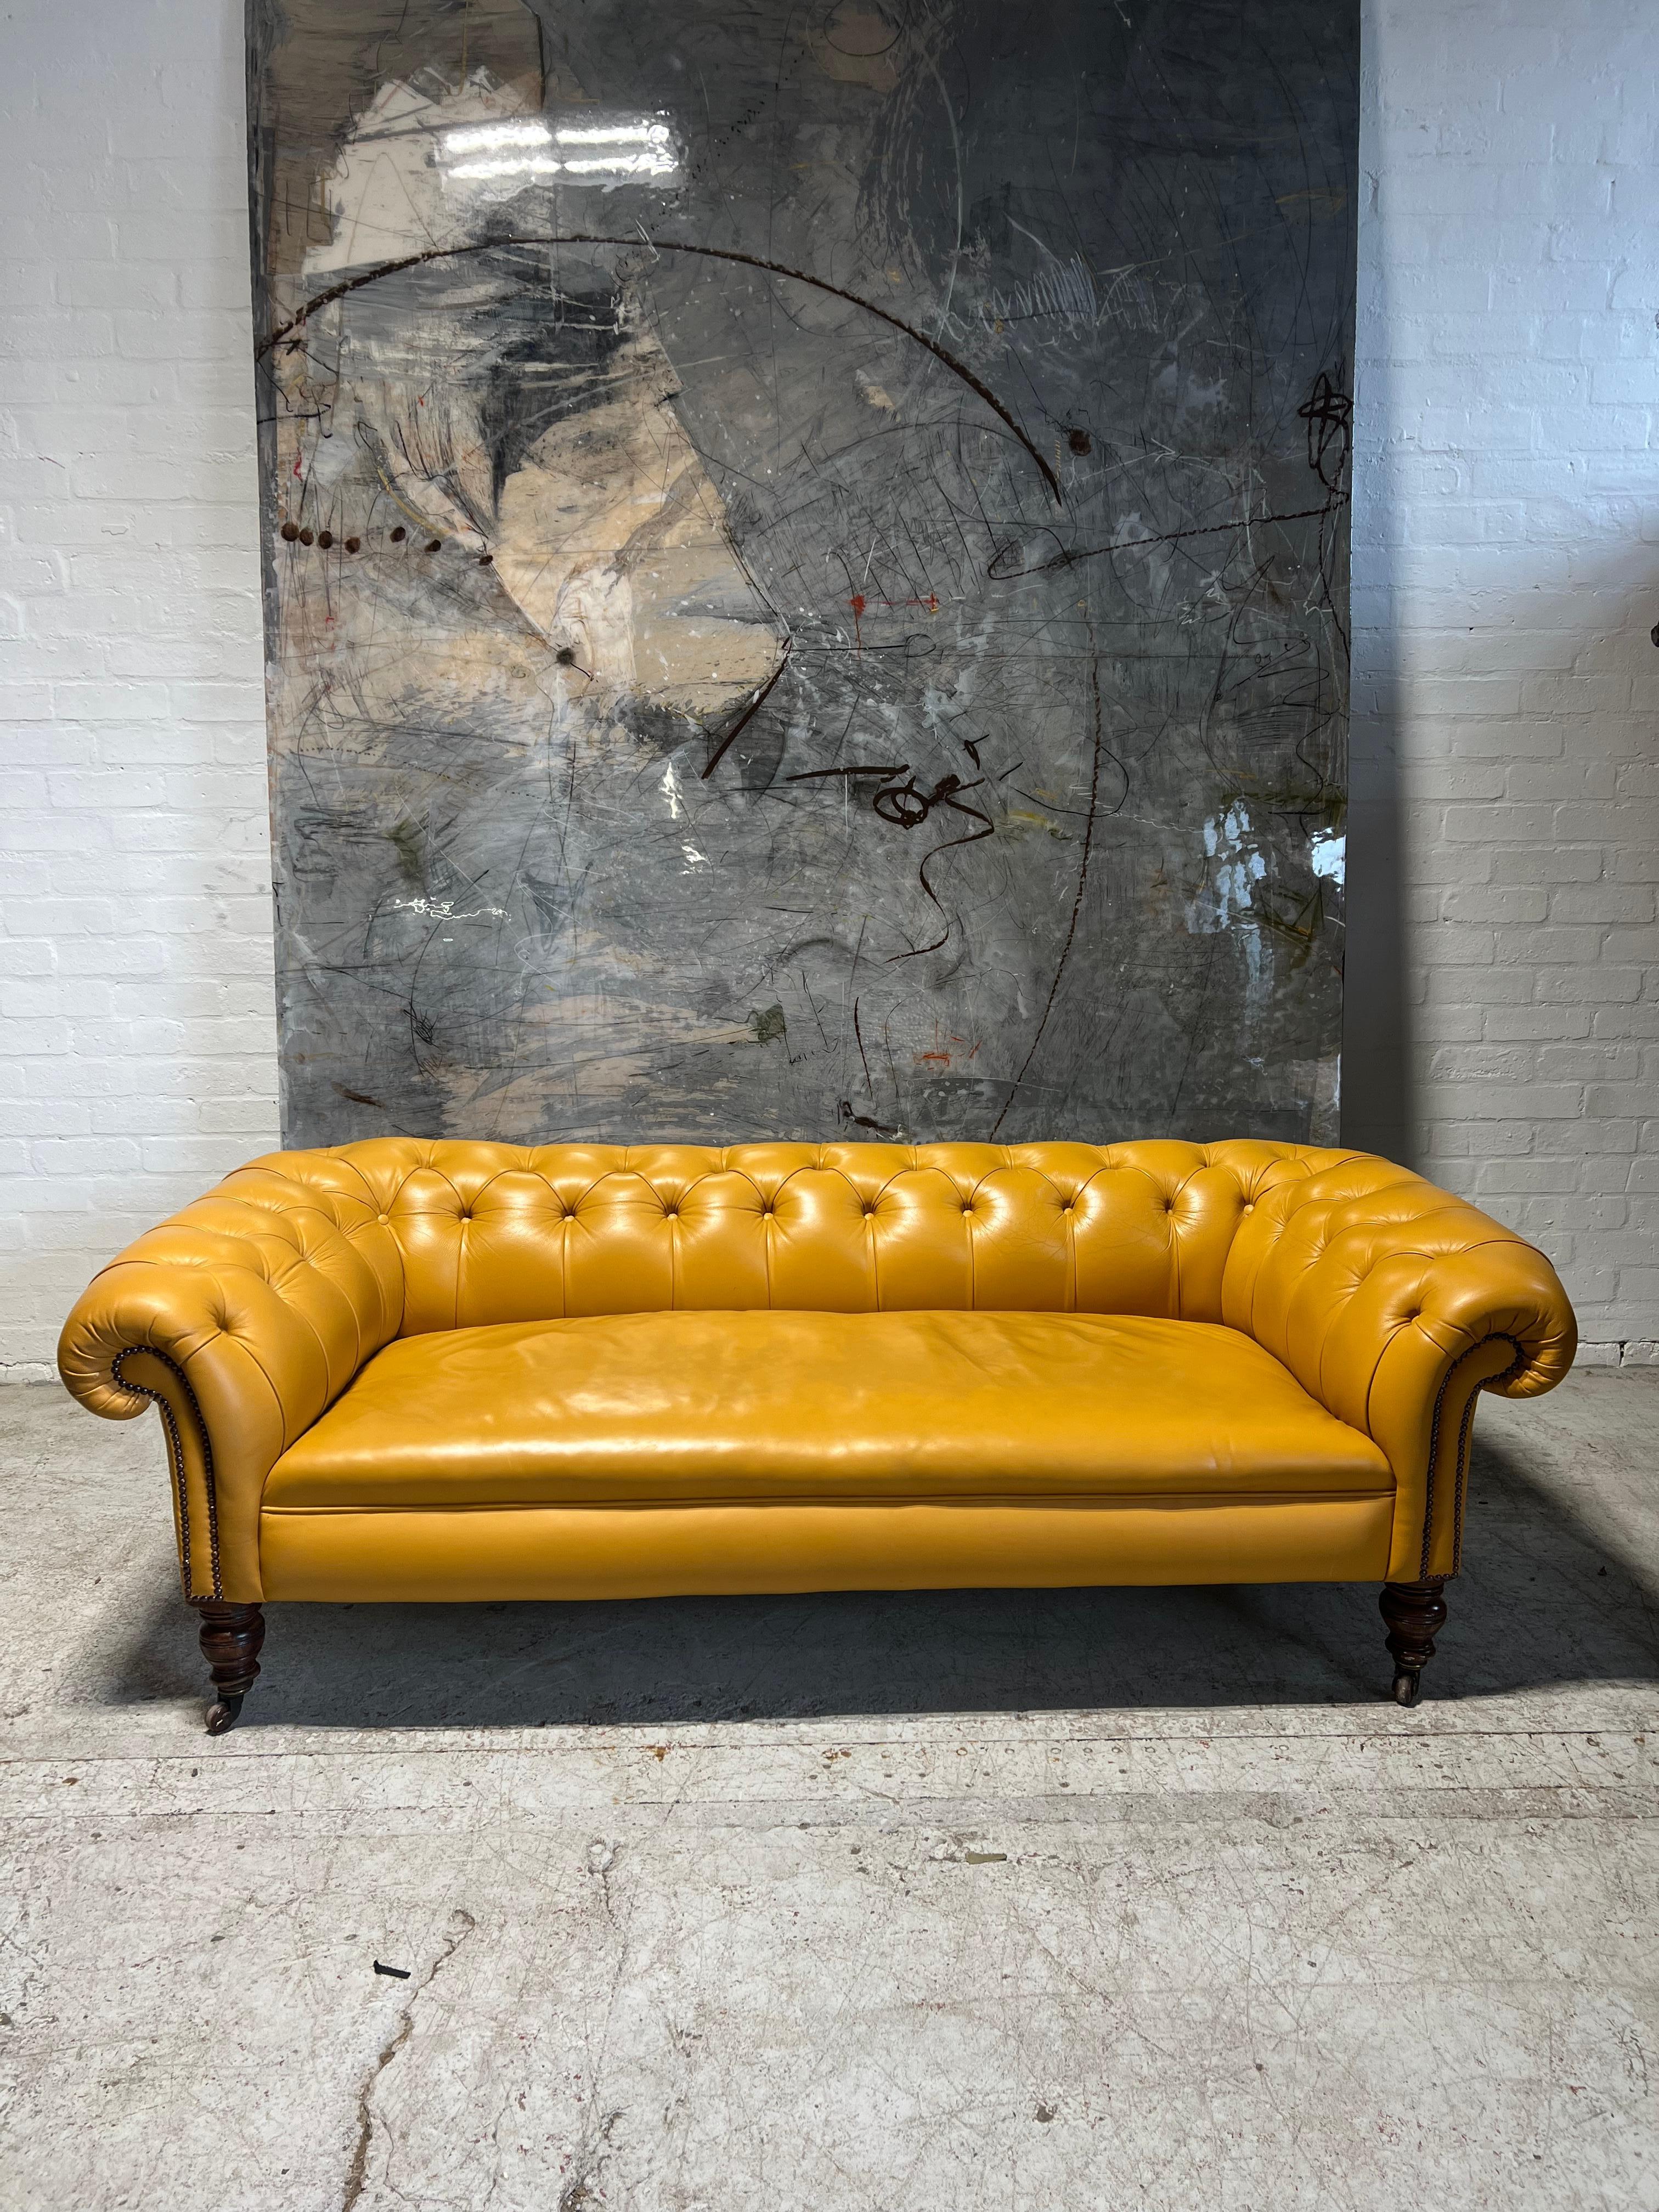 Antique 19thC Chesterfield Sofa in Stunning Sunflower Yellow Leather 1